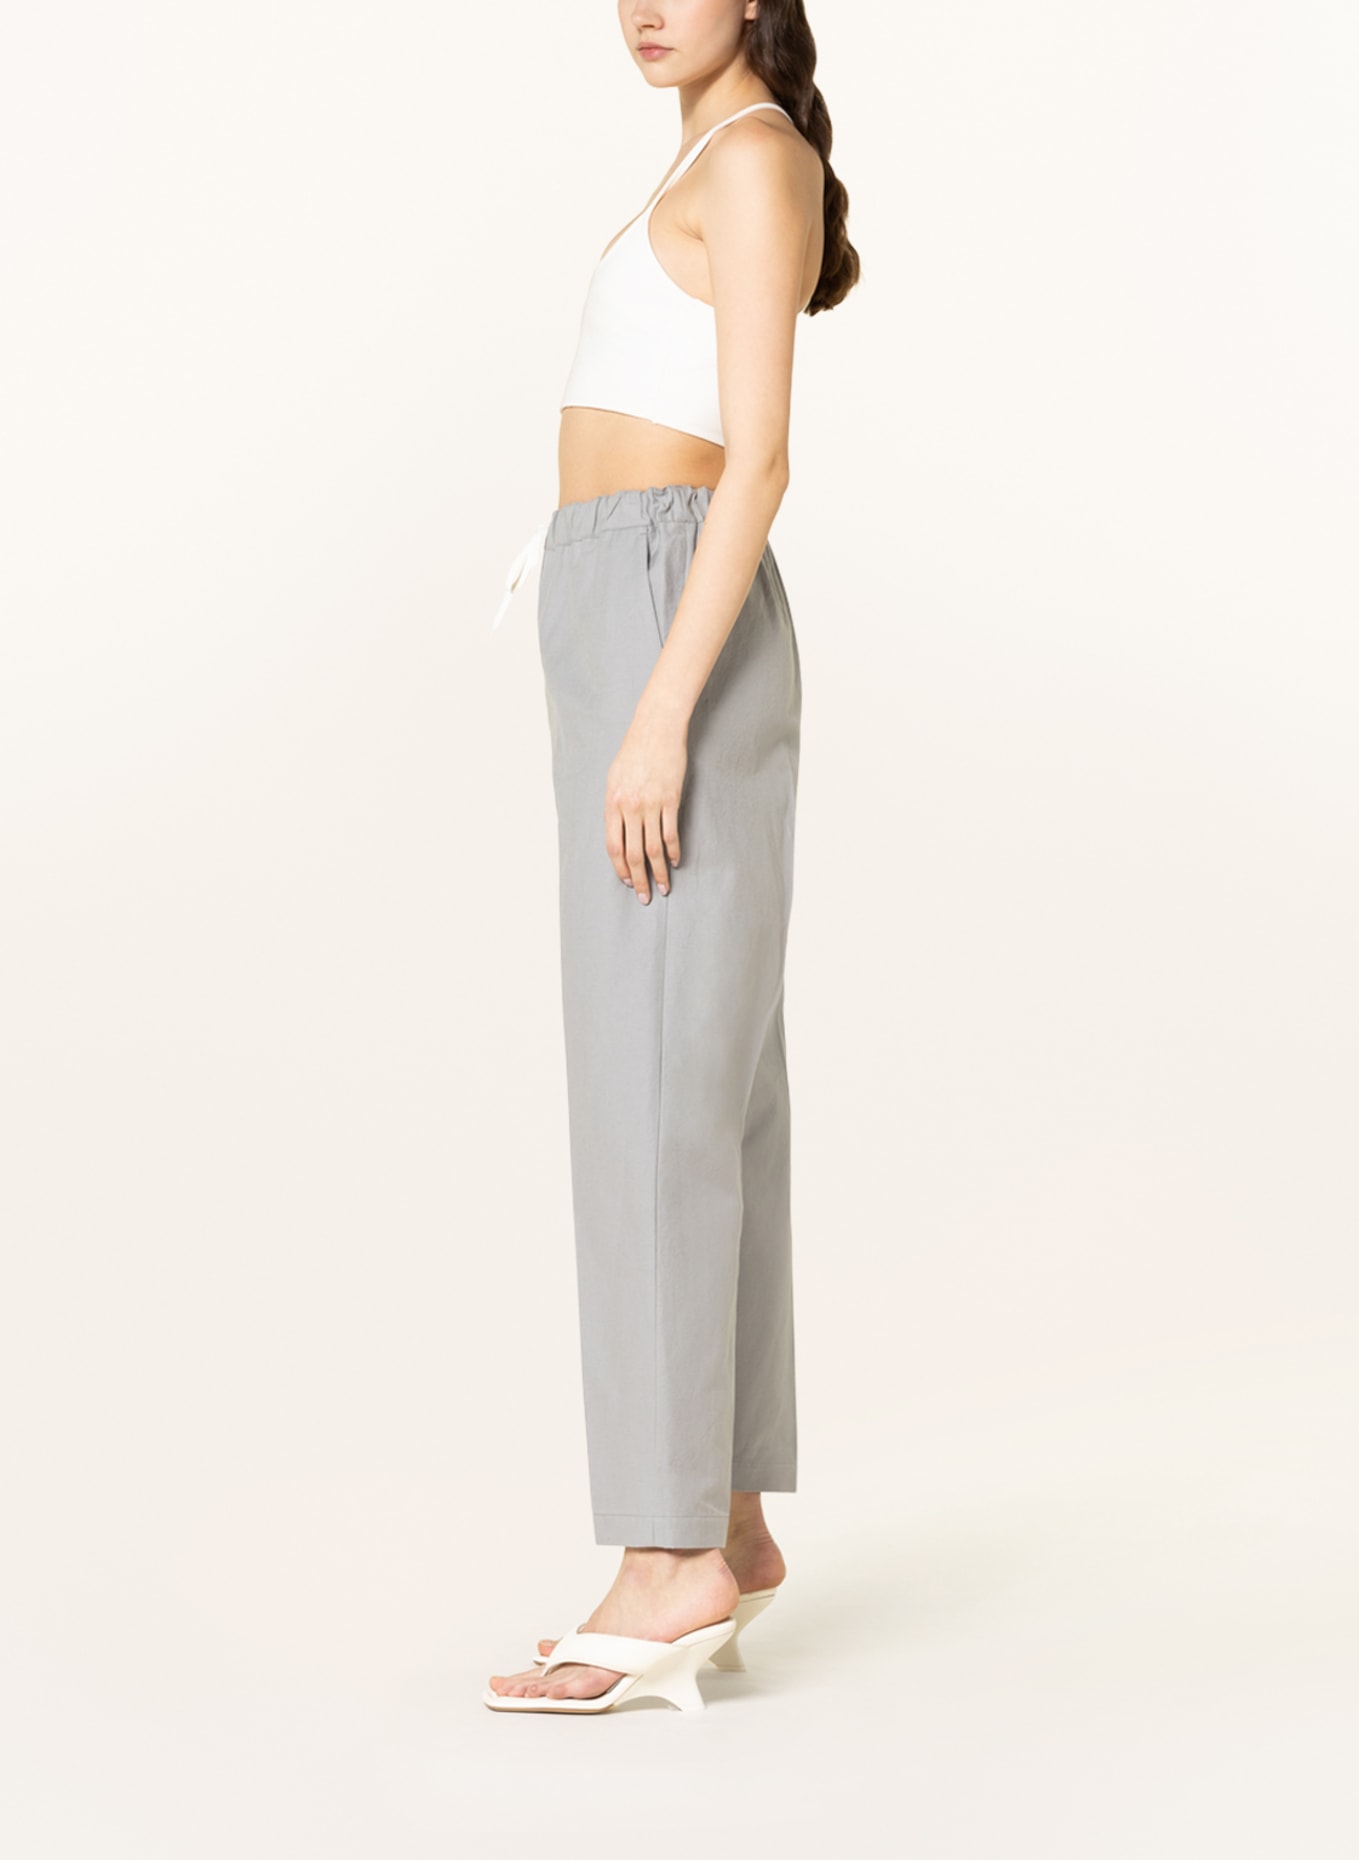 MM6 Maison Margiela Pants in jogger style, Color: LIGHT GRAY (Image 4)